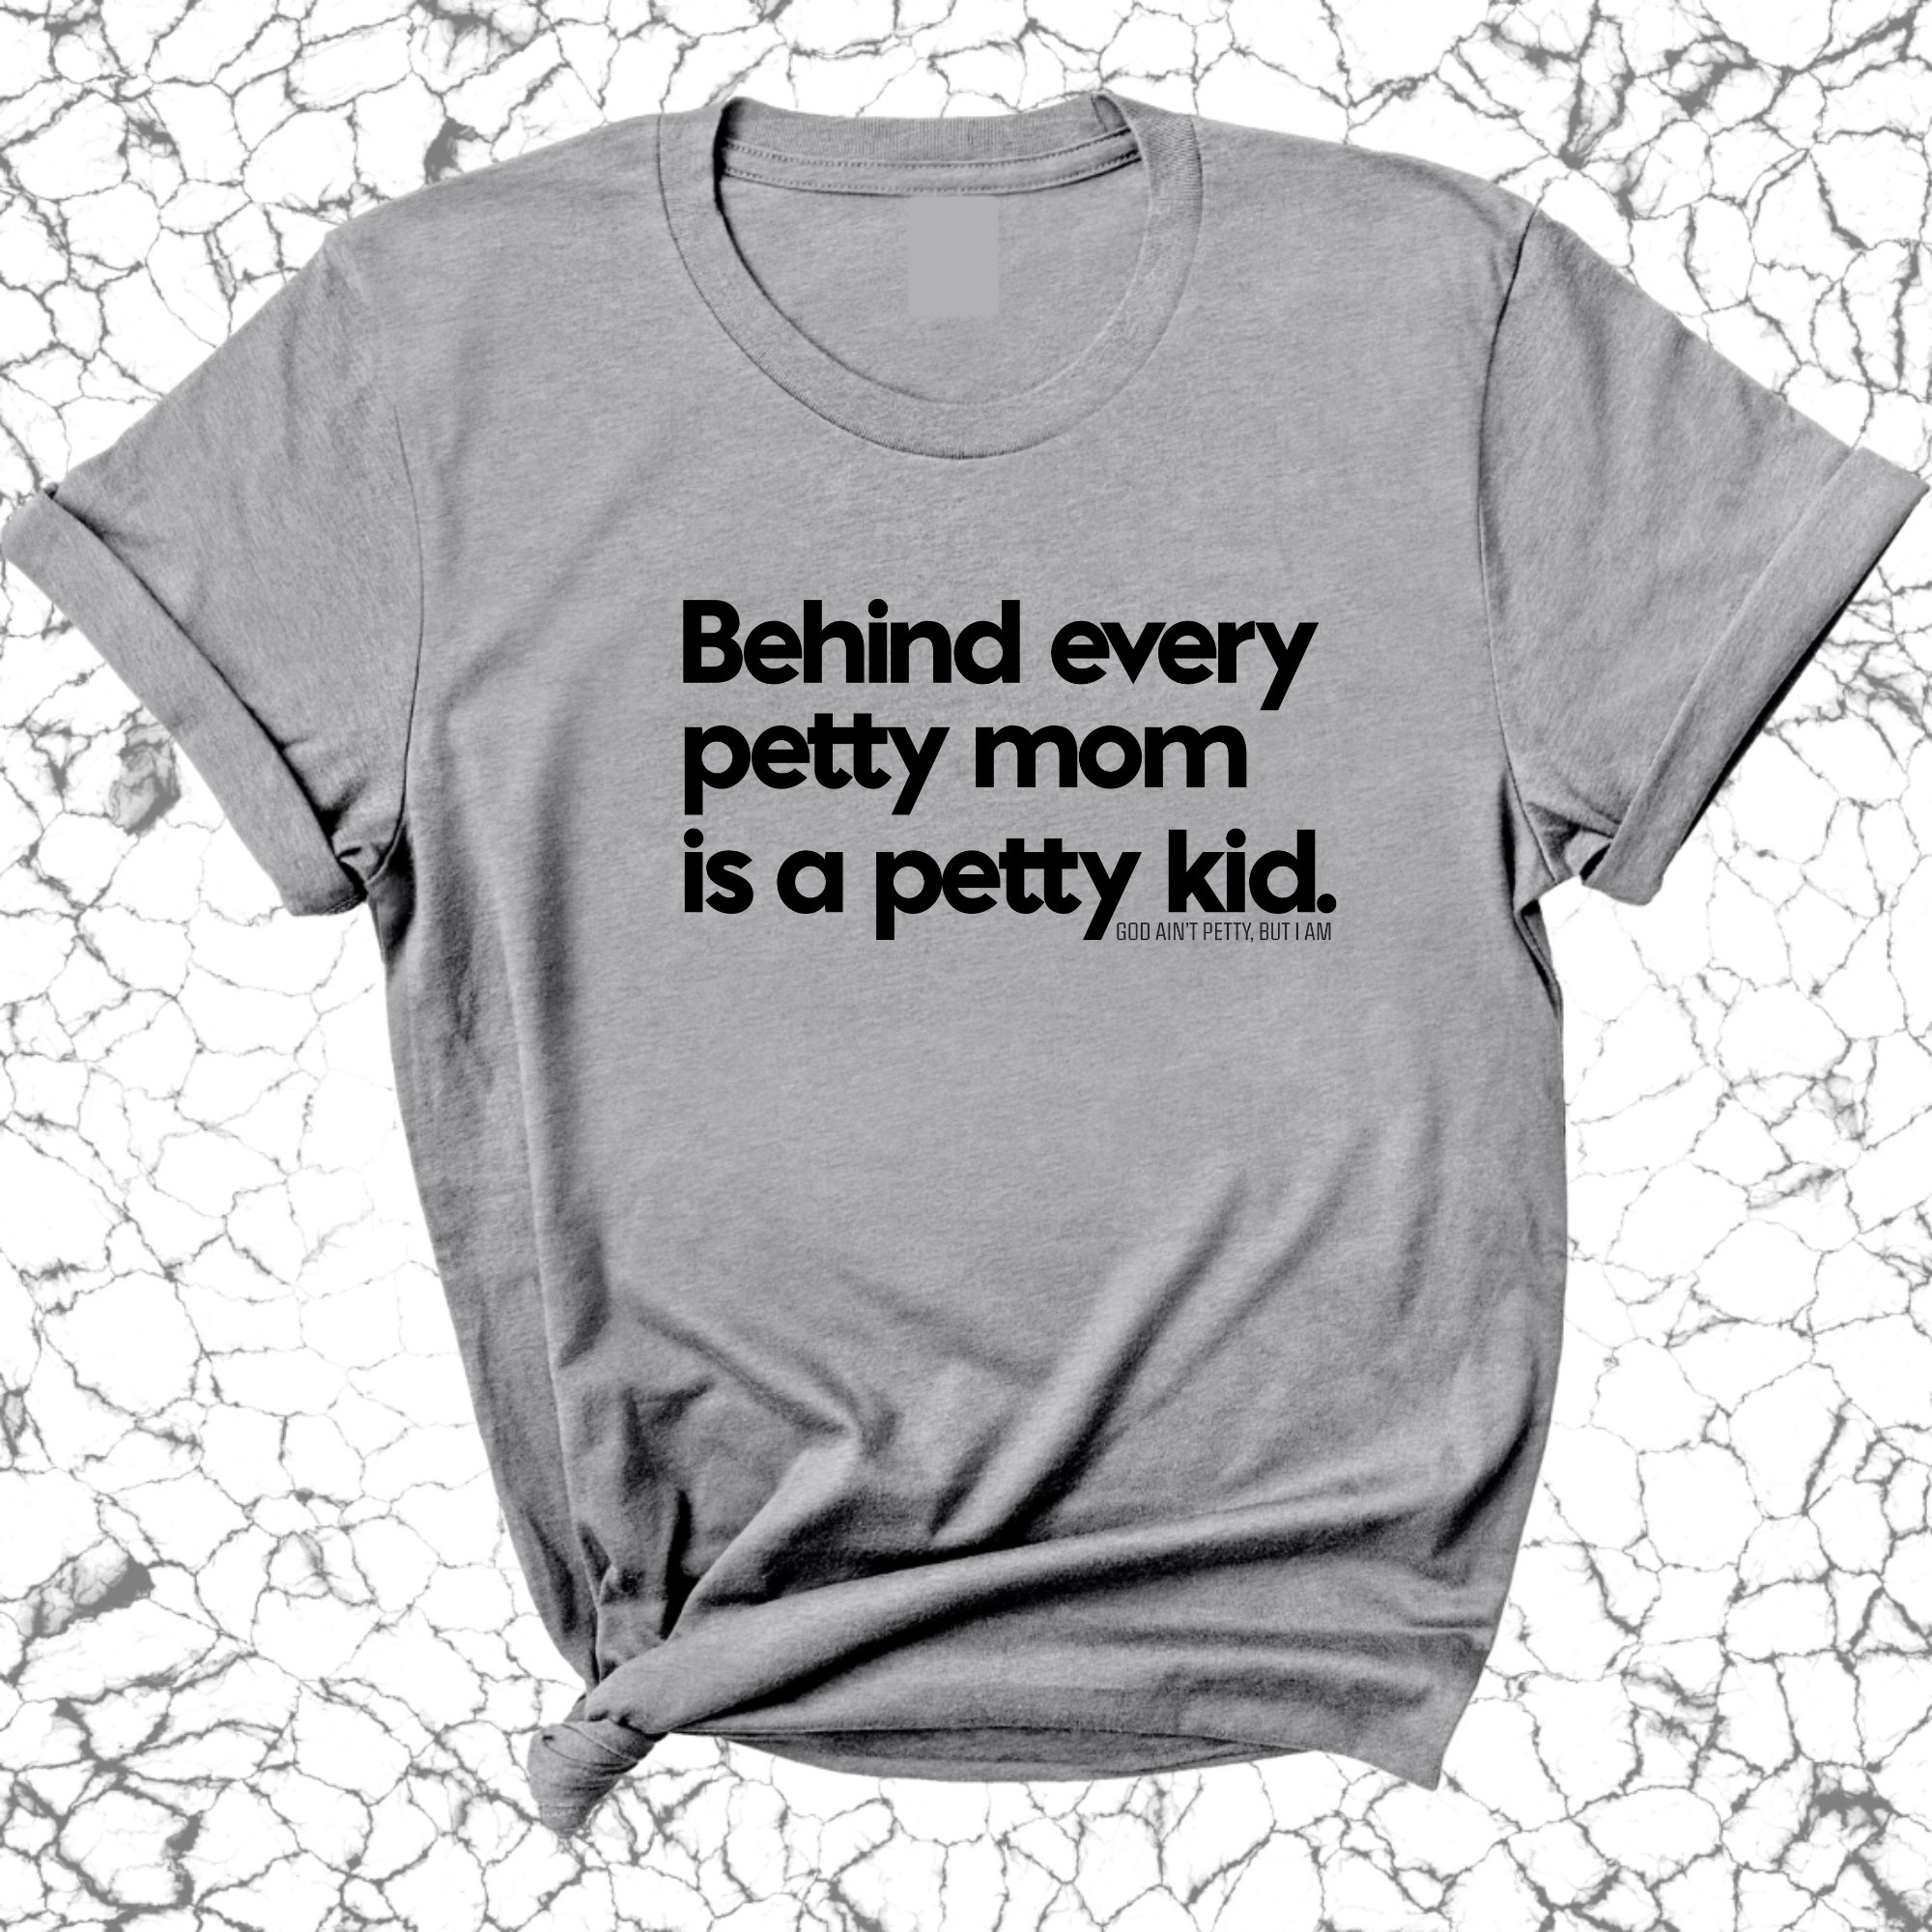 Behind every petty mom is a petty kid Unisex Tee-T-Shirt-The Original God Ain't Petty But I Am